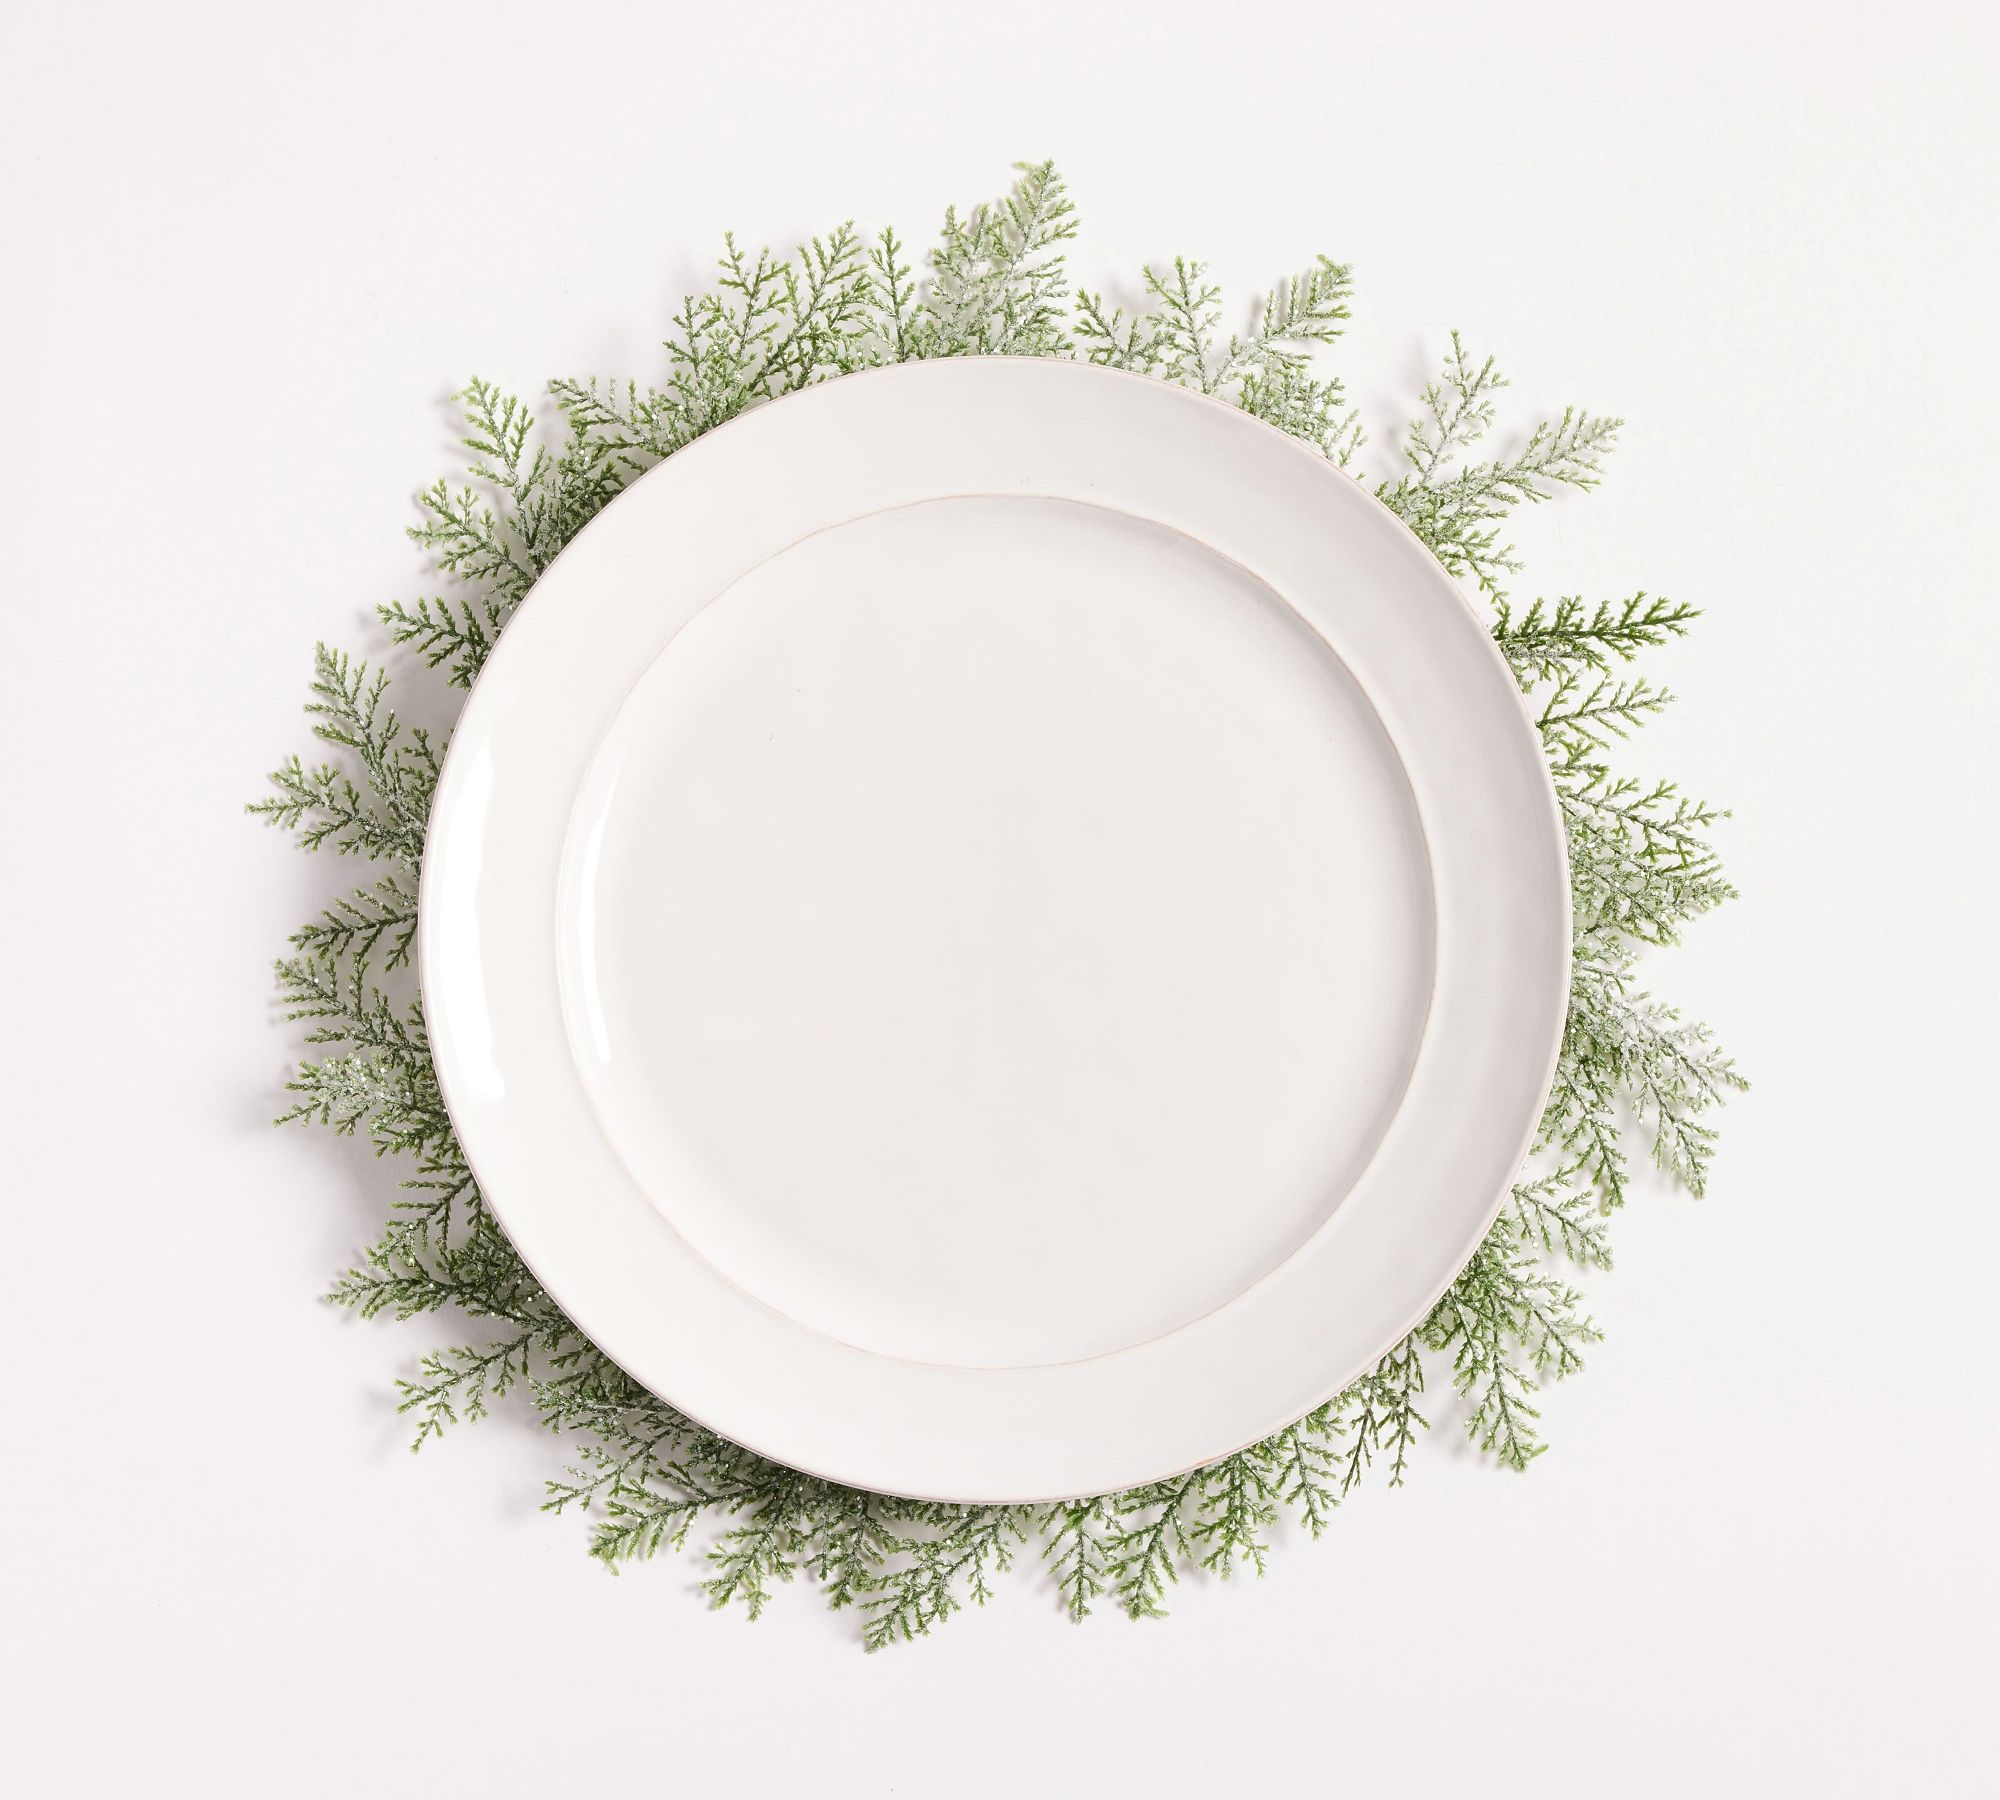 Snowy Wreath Chargers - Set of 4